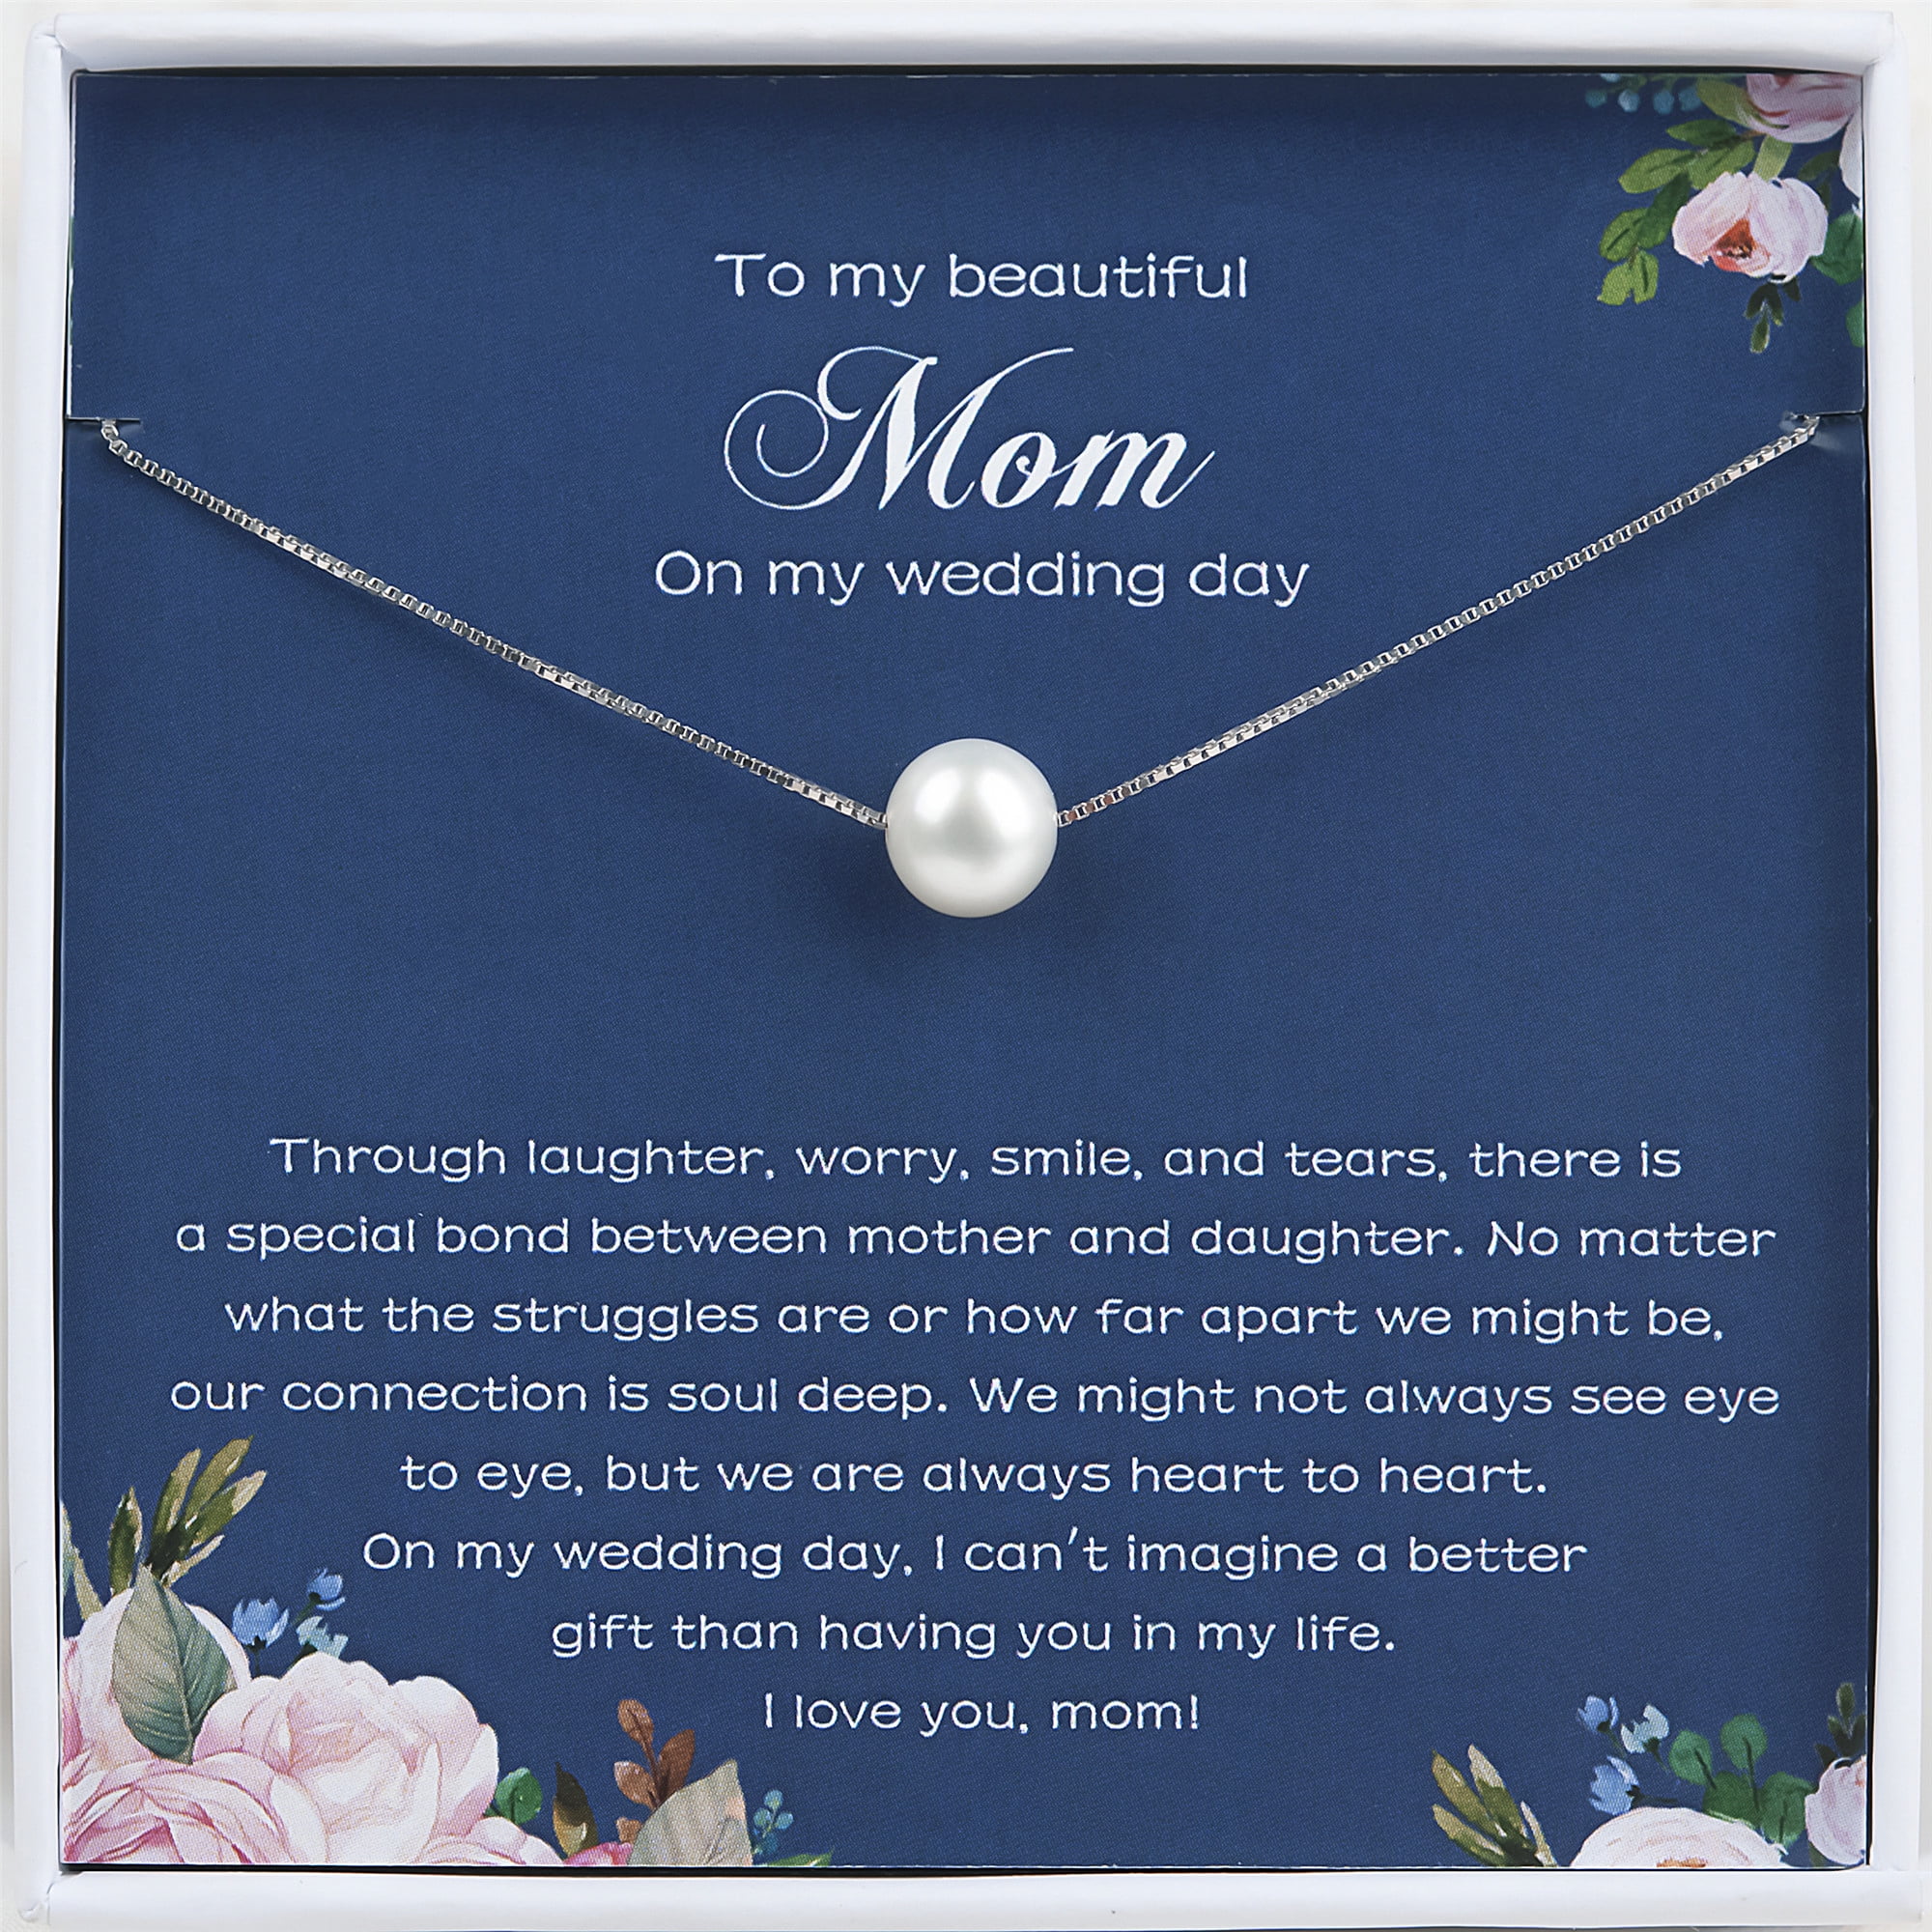 Forever Your Son Mom Keepsake Wedding Day Card For Mom from Son To my Mother Card for Mom from Son on Wedding Day from Groom